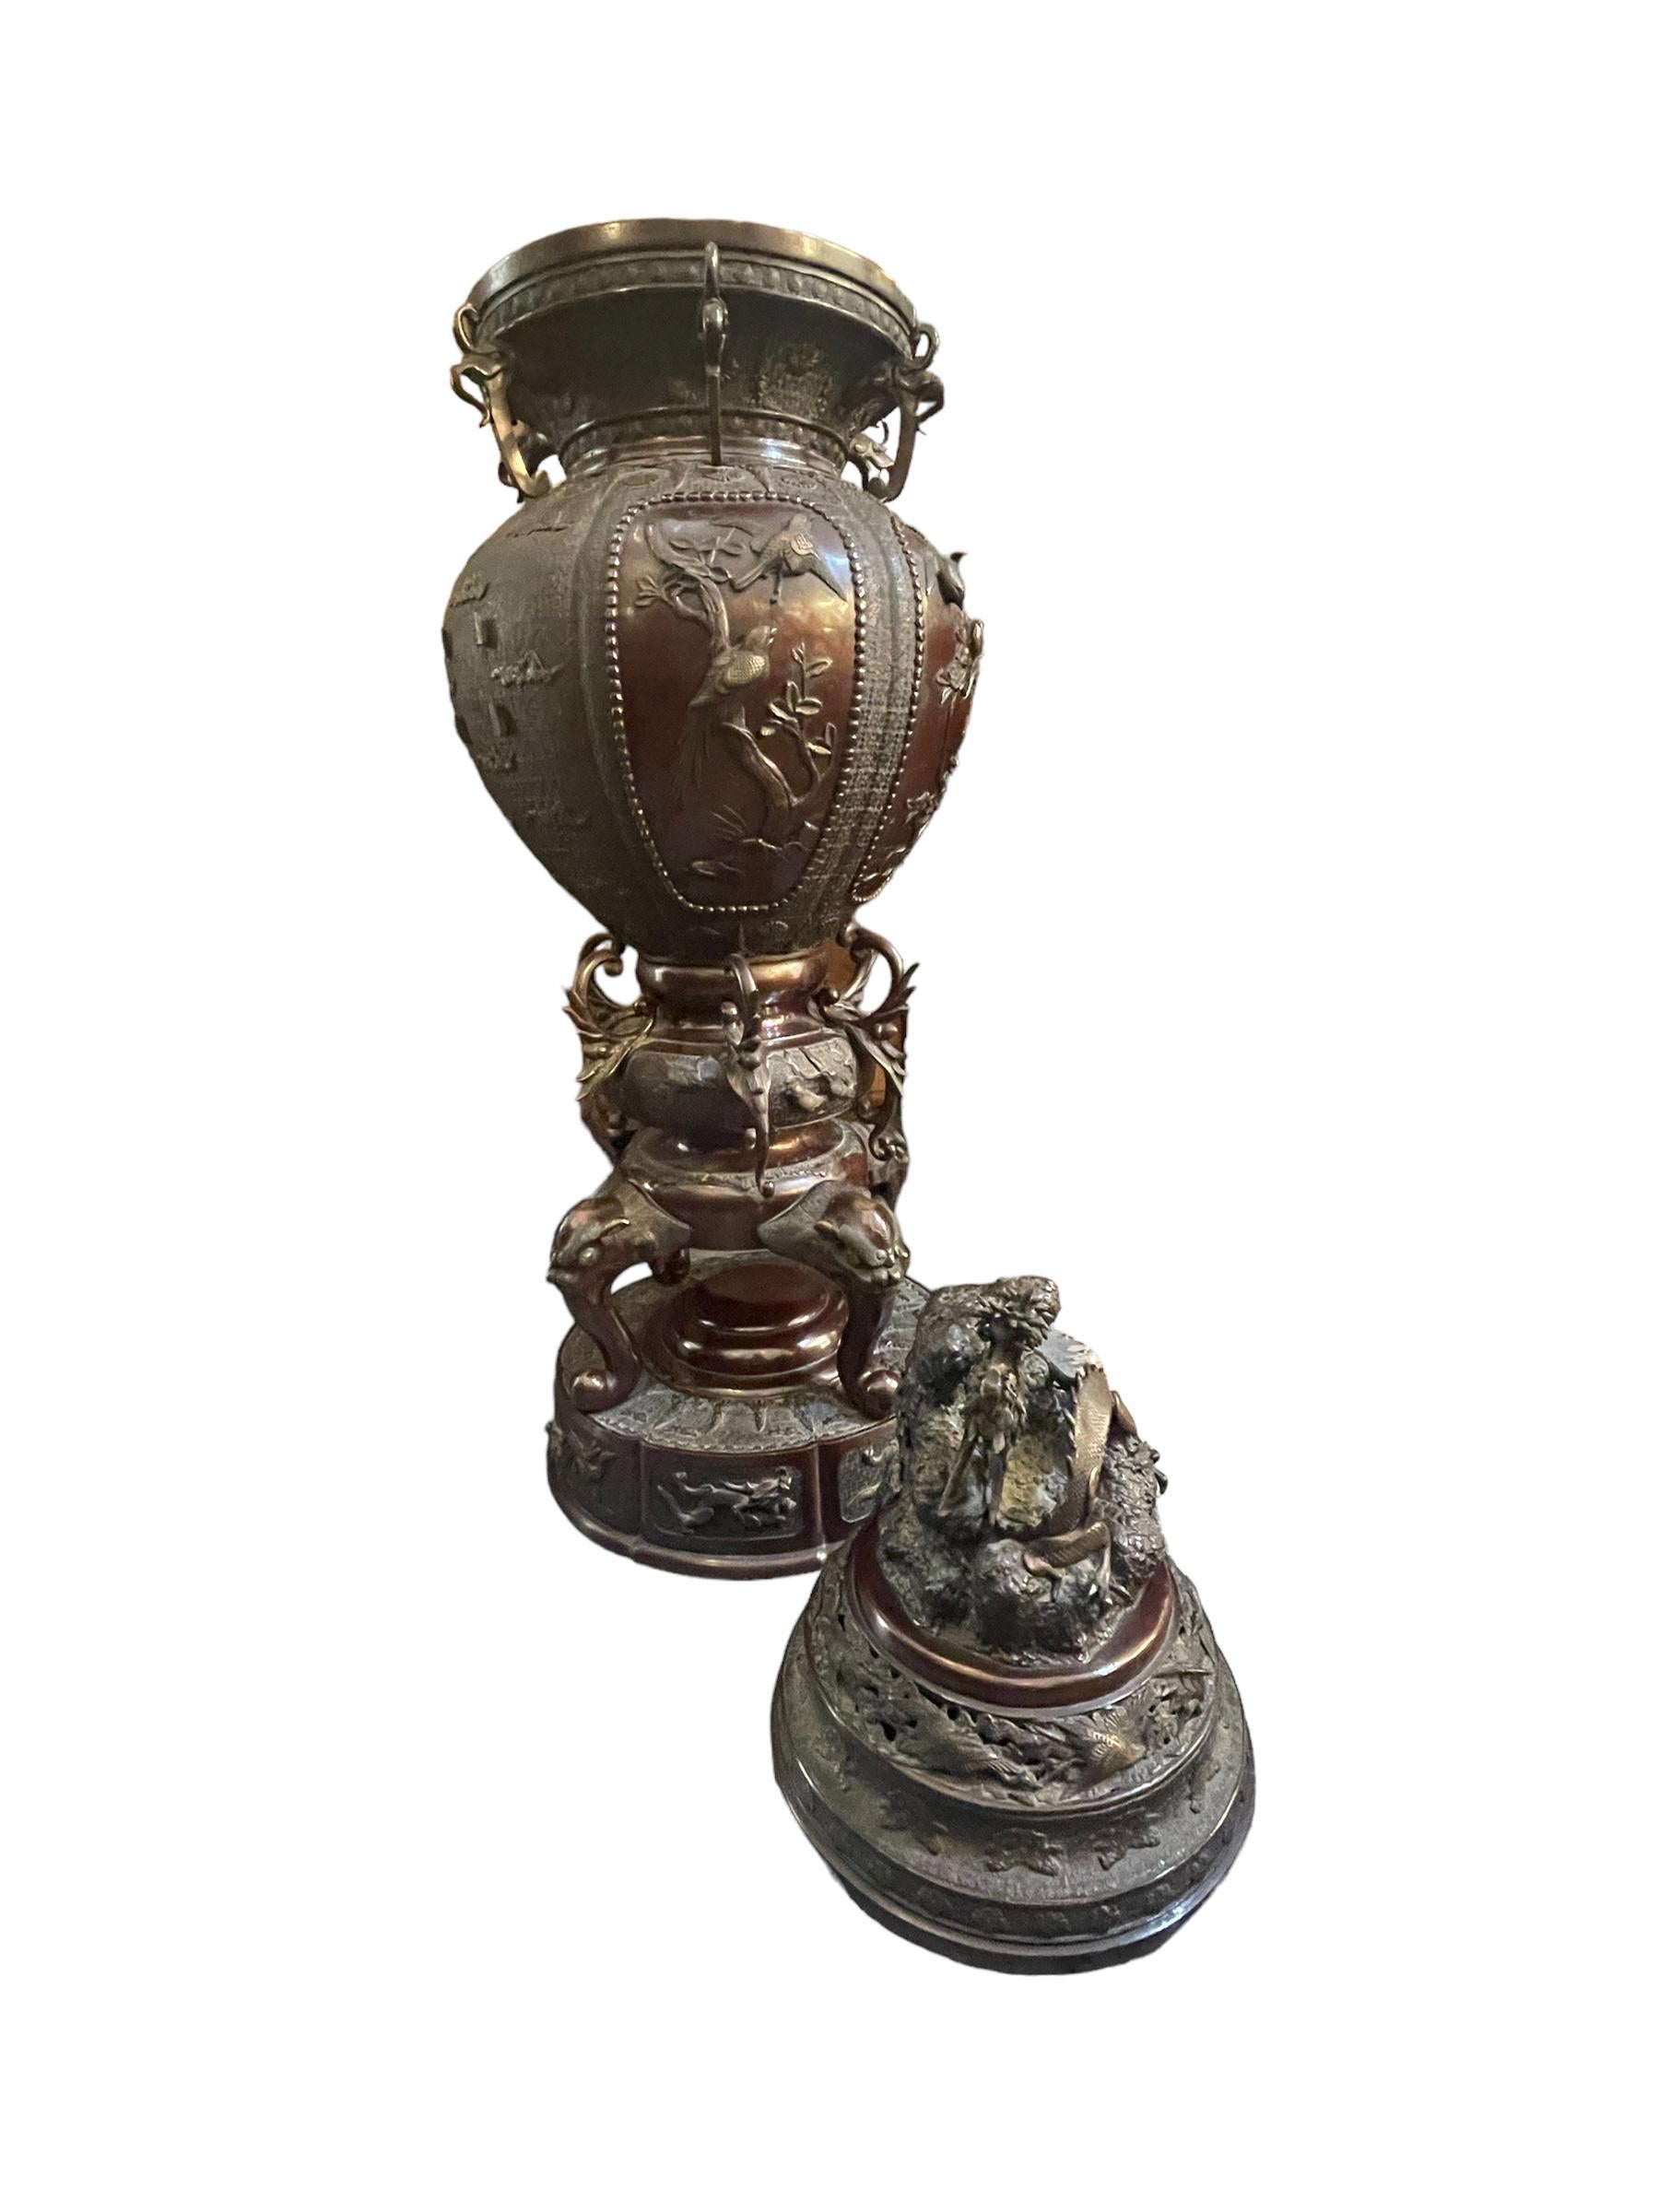 19th Century Imposing Japanese censer, 19th century, patinated bronze. For Sale